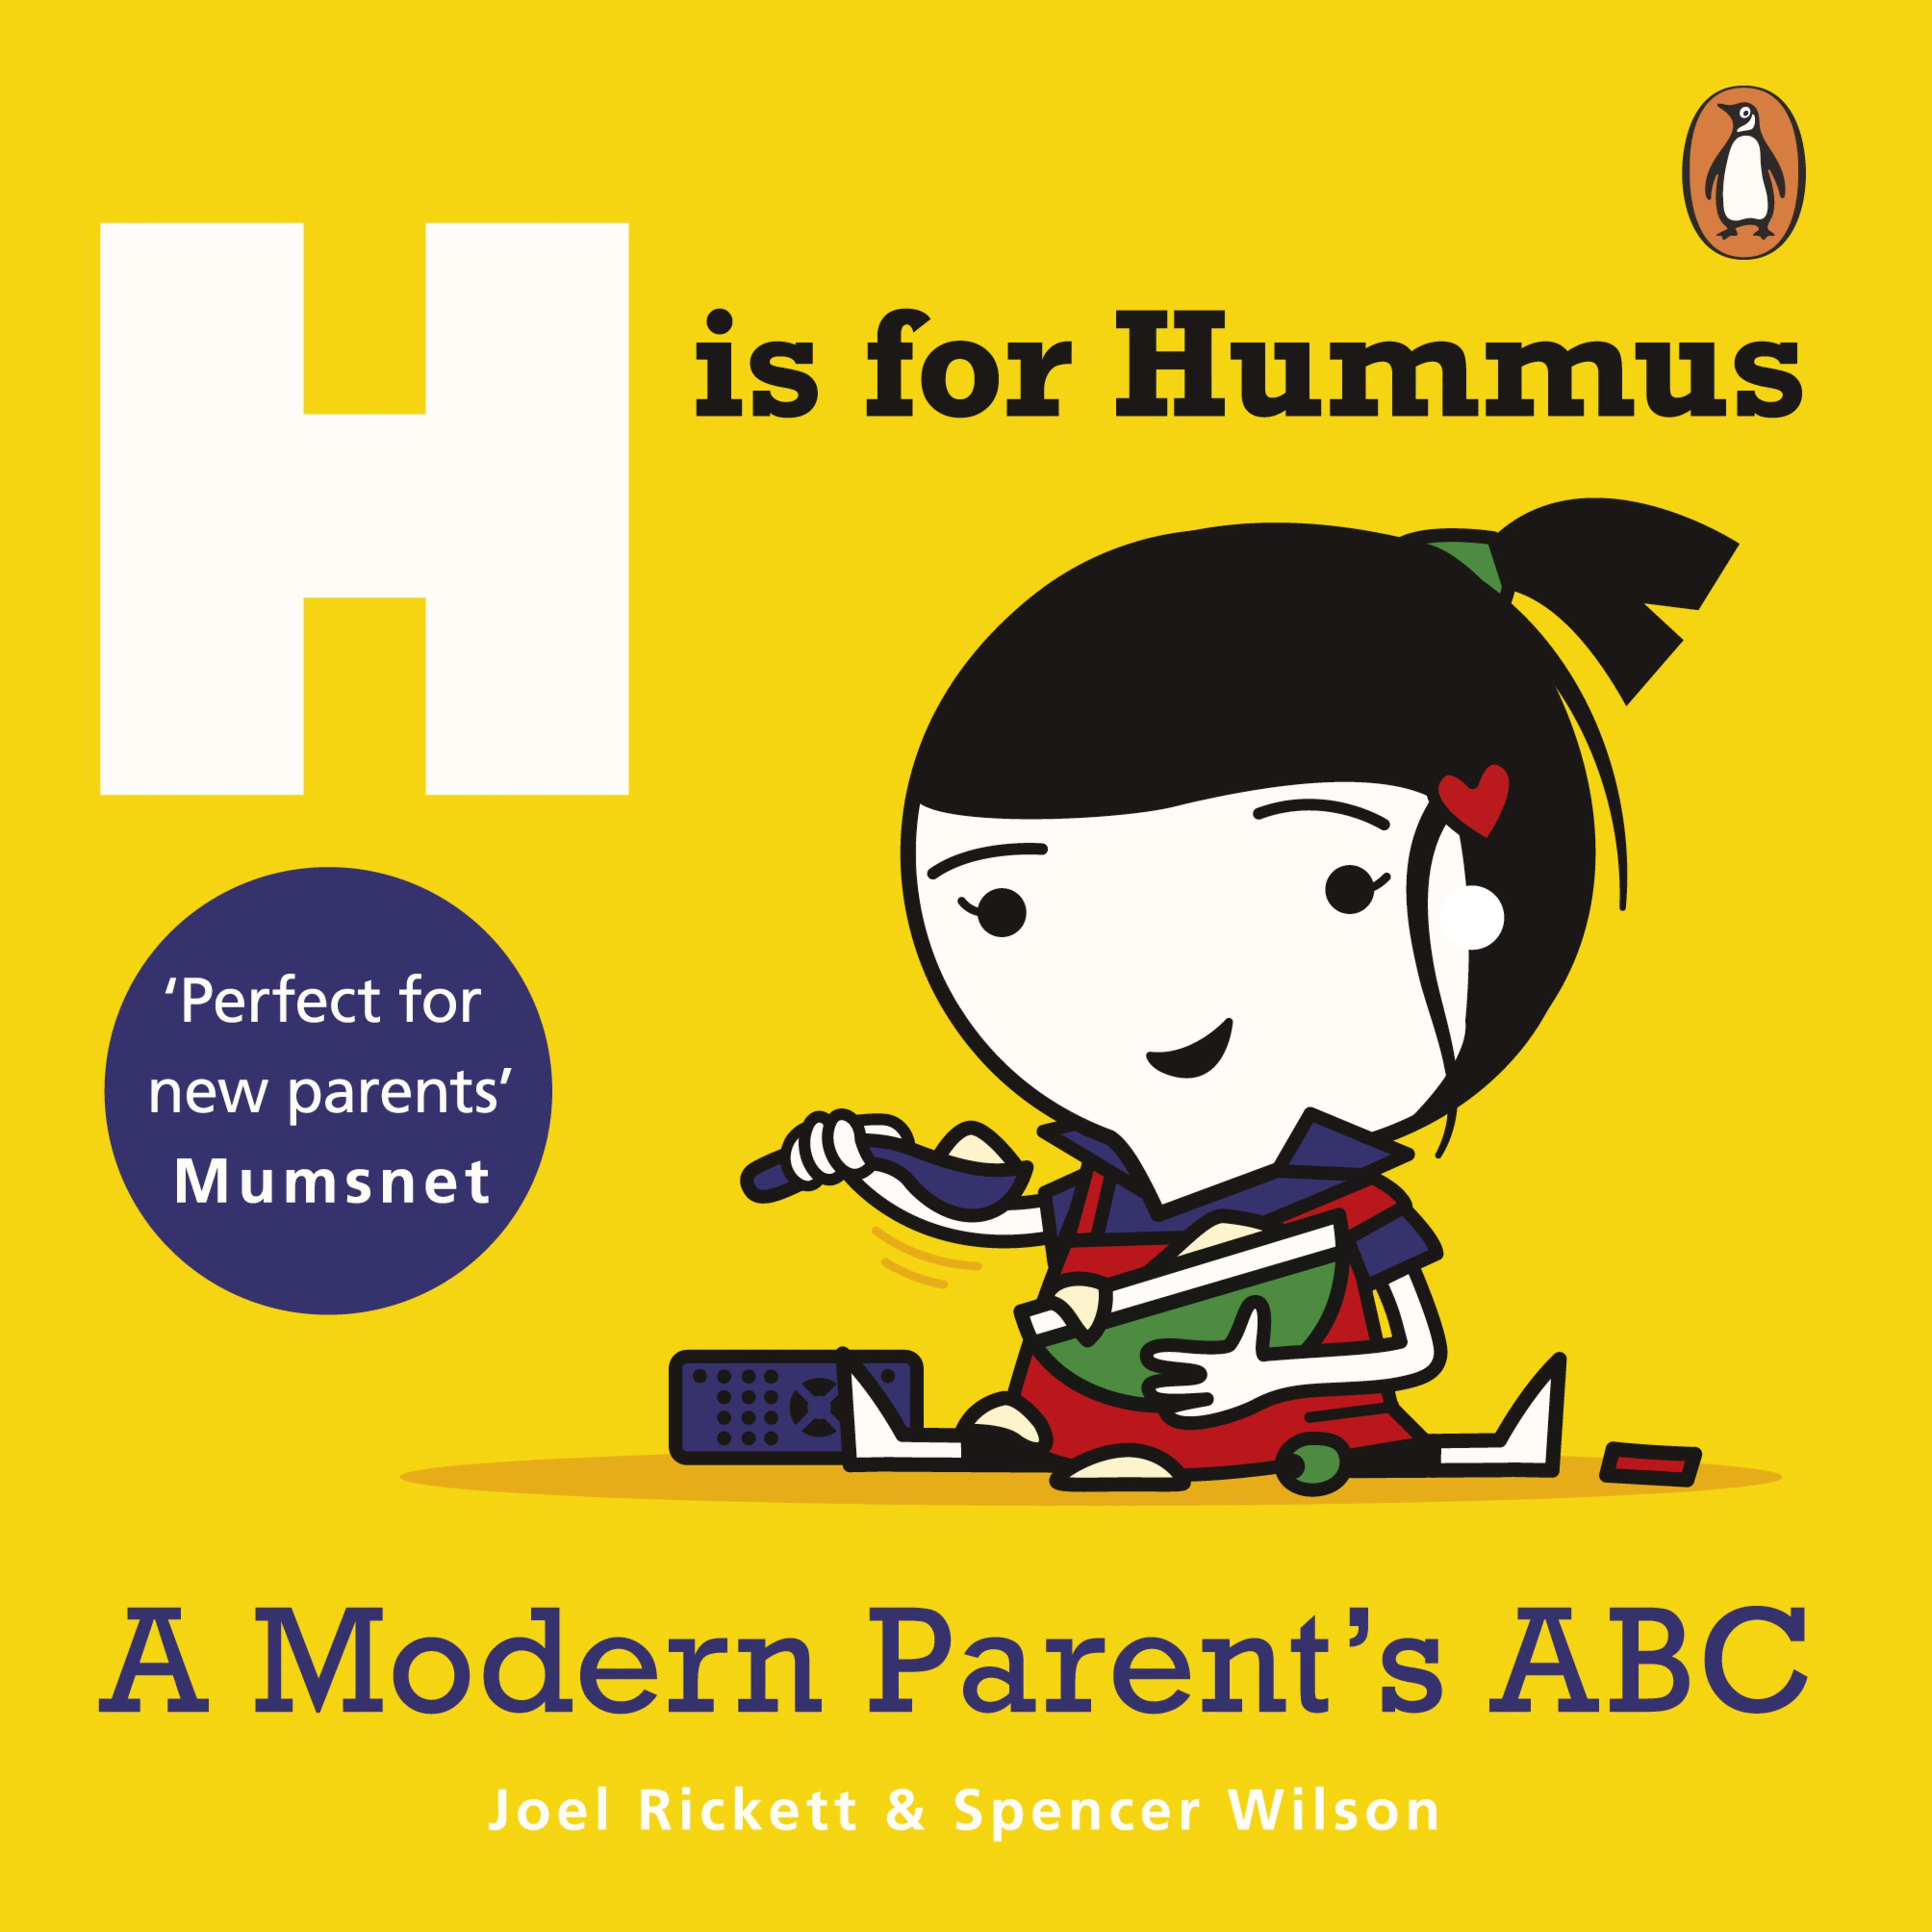 H Is For Hummus Funny Image